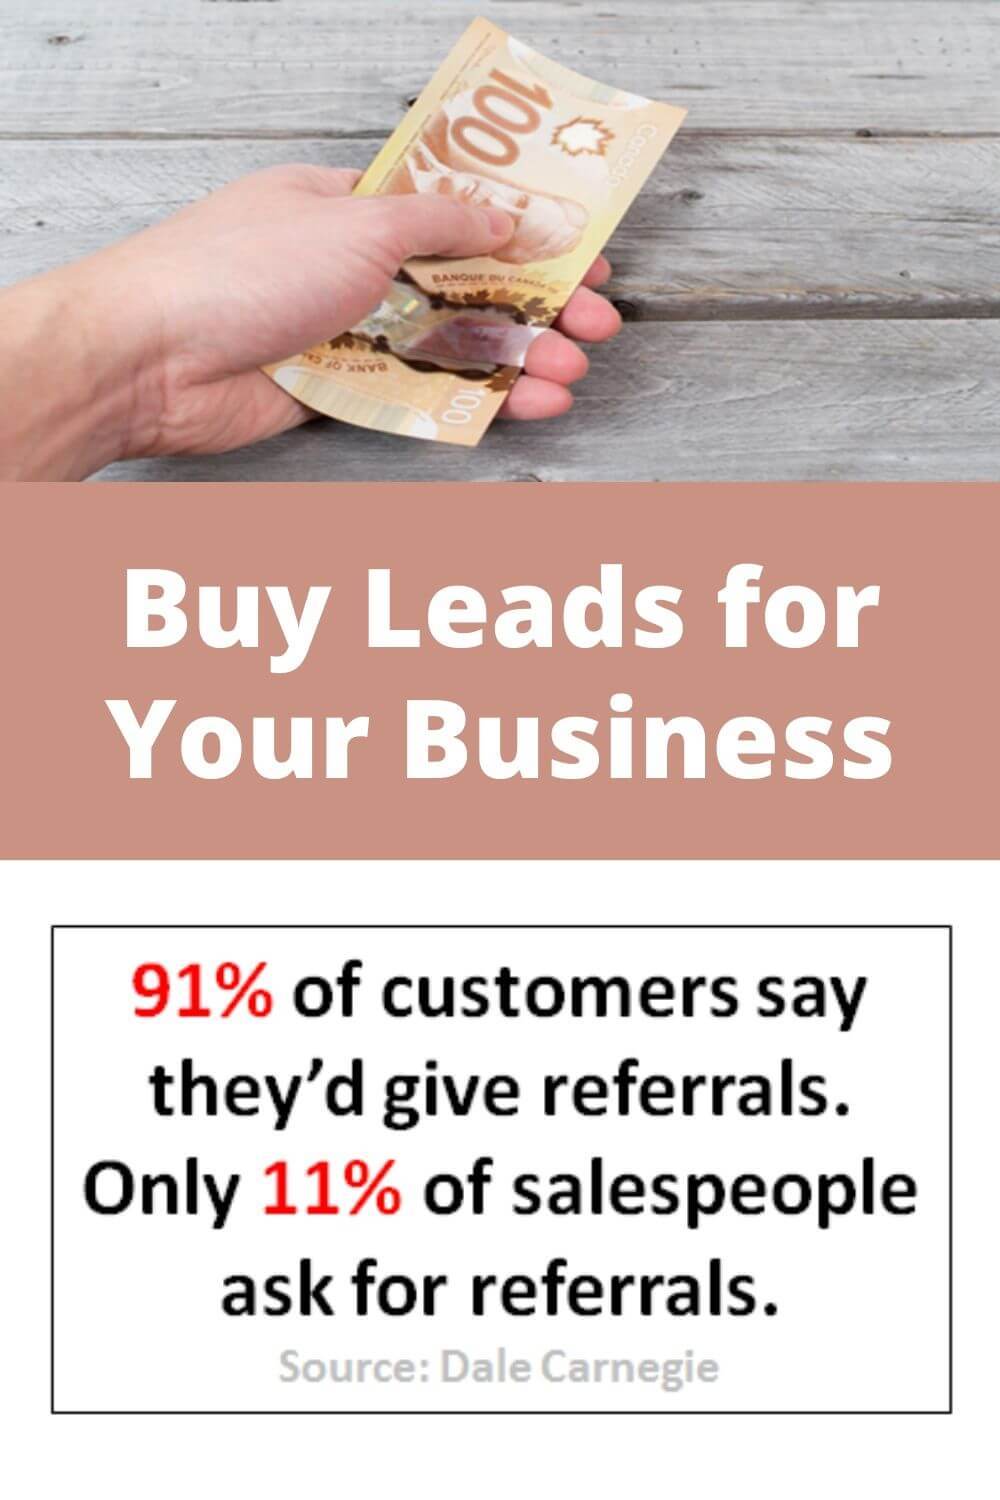 Buy Leads for Your Business